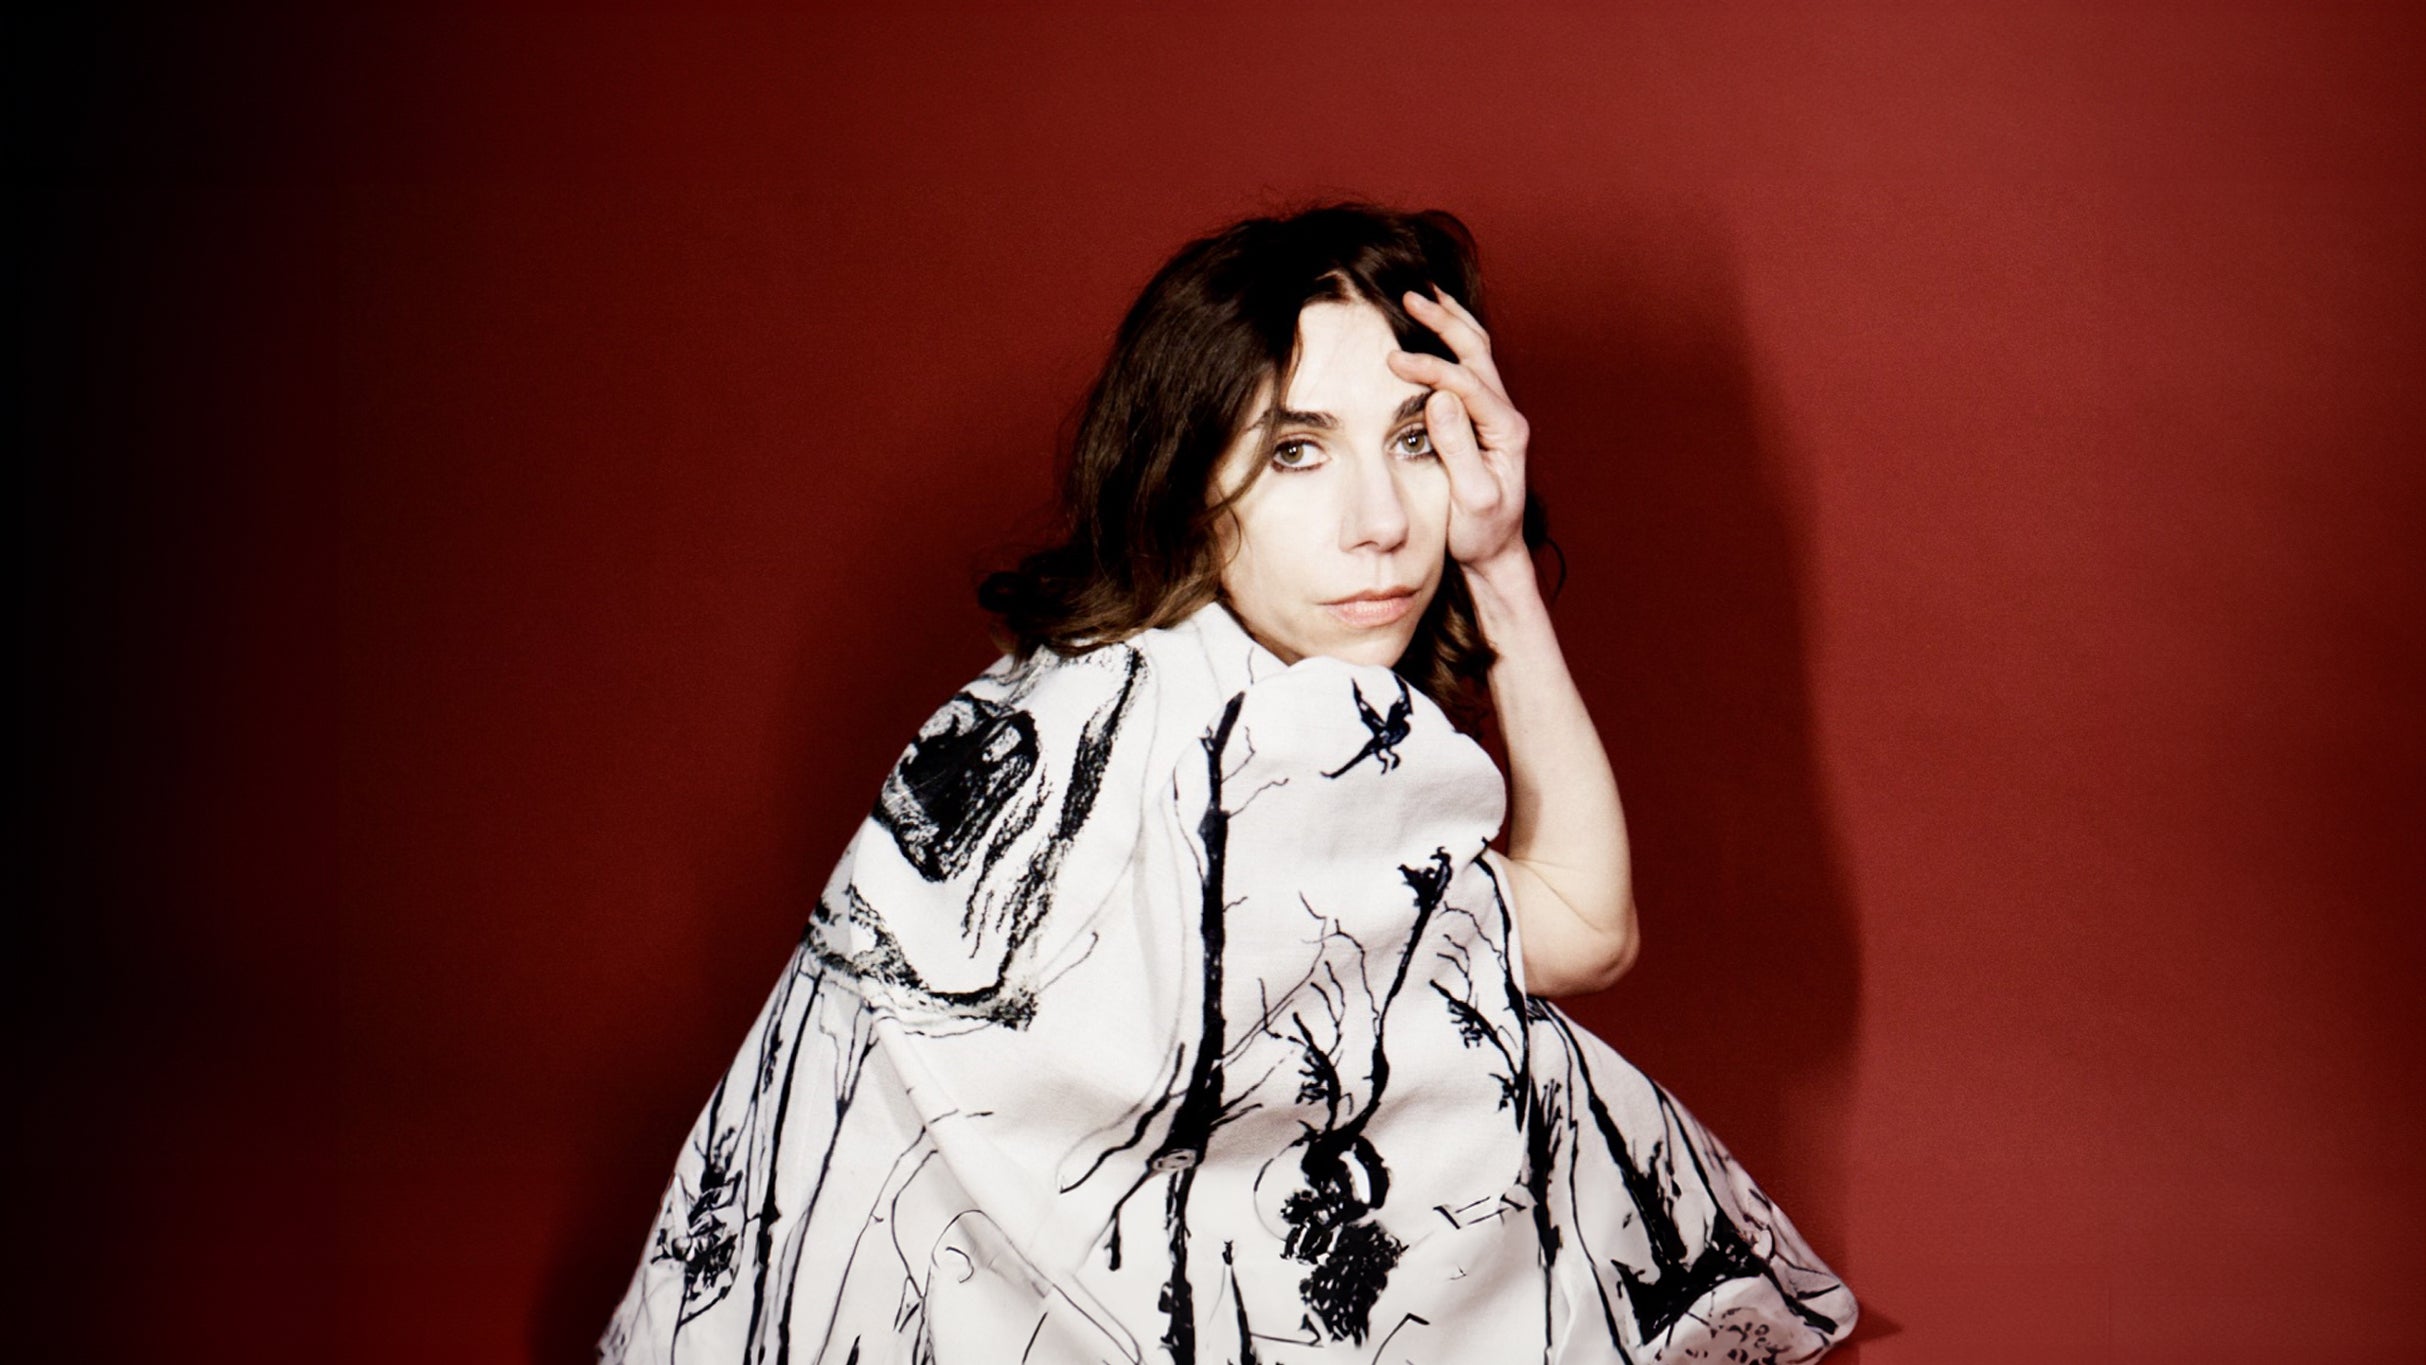 An Evening With PJ Harvey presale code for your tickets in Washington